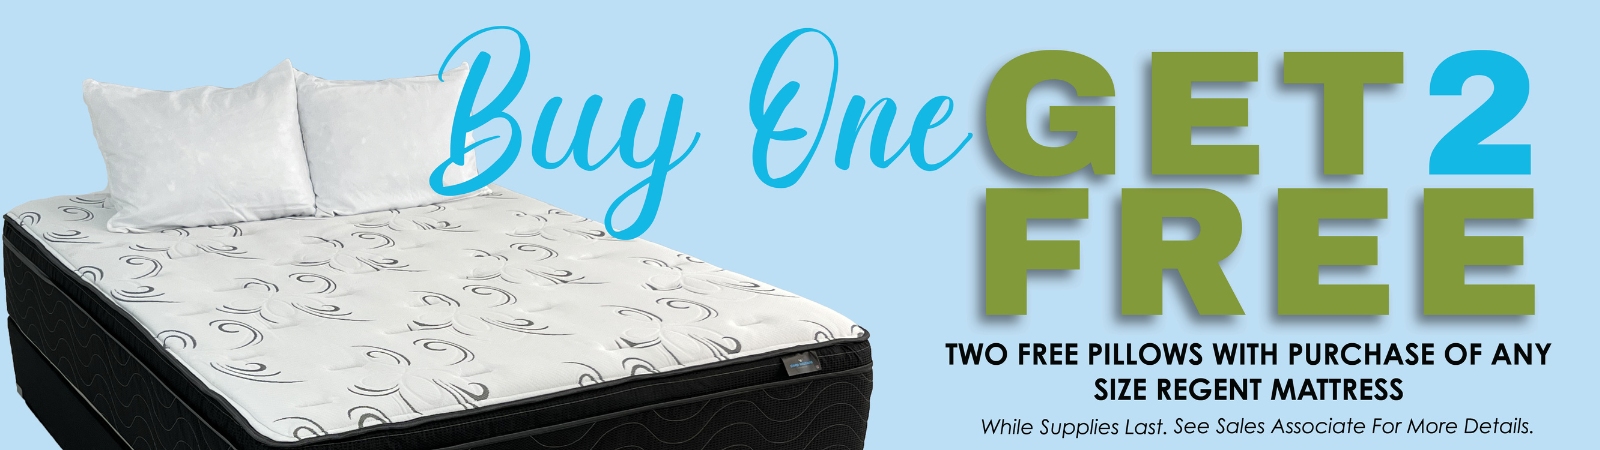 Get 2 FREE Pillows with Your Mattress Purchase! 